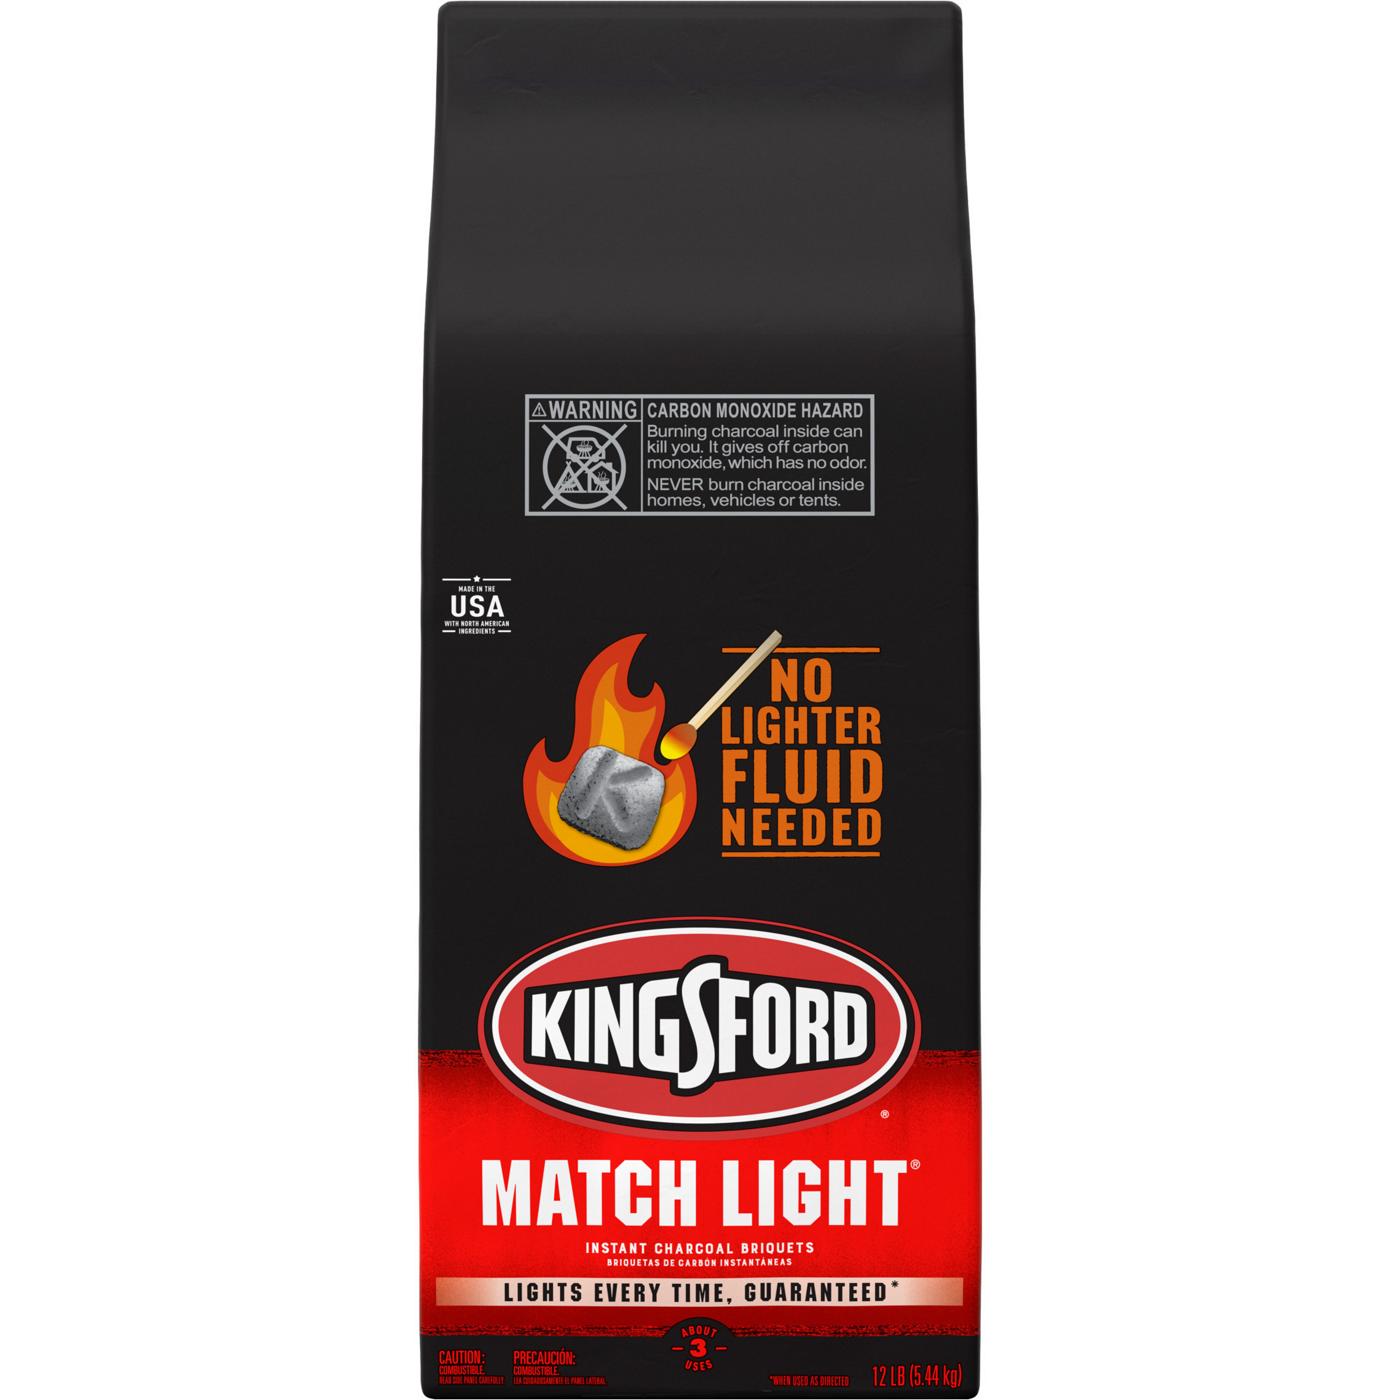 Kingsford Match Light Instant Charcoal Briquettes, BBQ Charcoal for Grilling; image 1 of 11